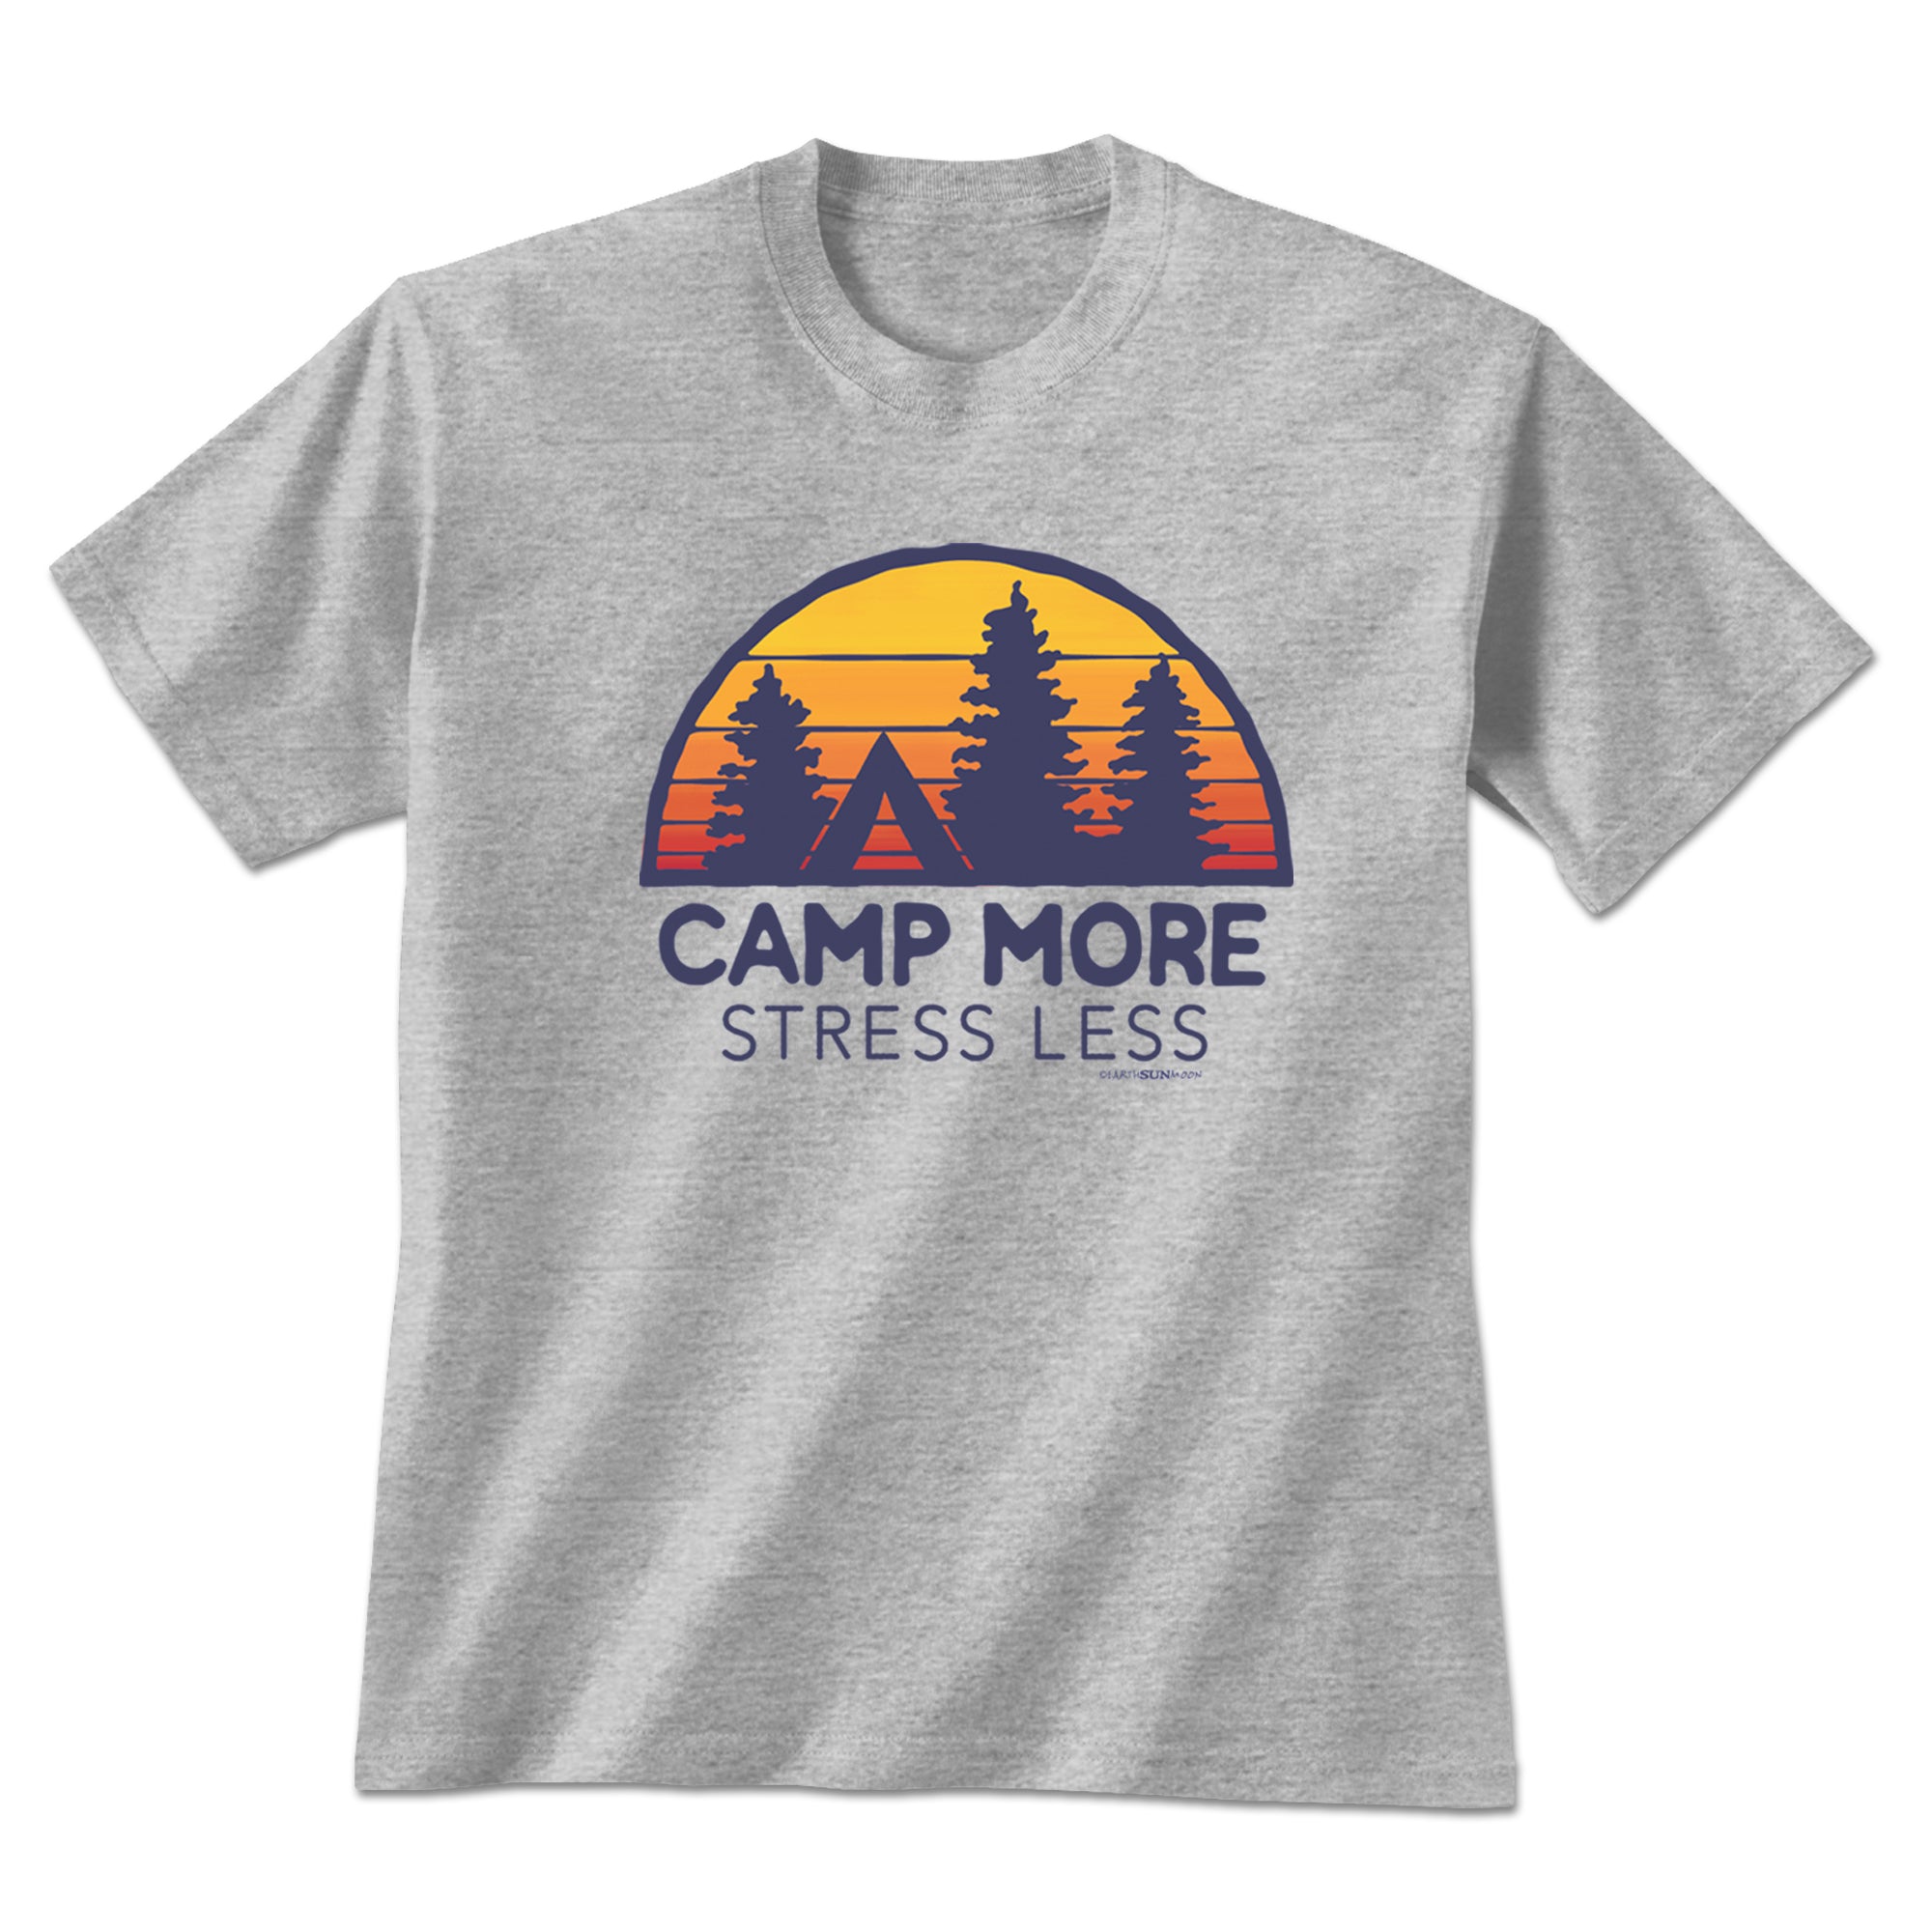 Camp More Stress Less T-Shirt - Sports Grey - Small